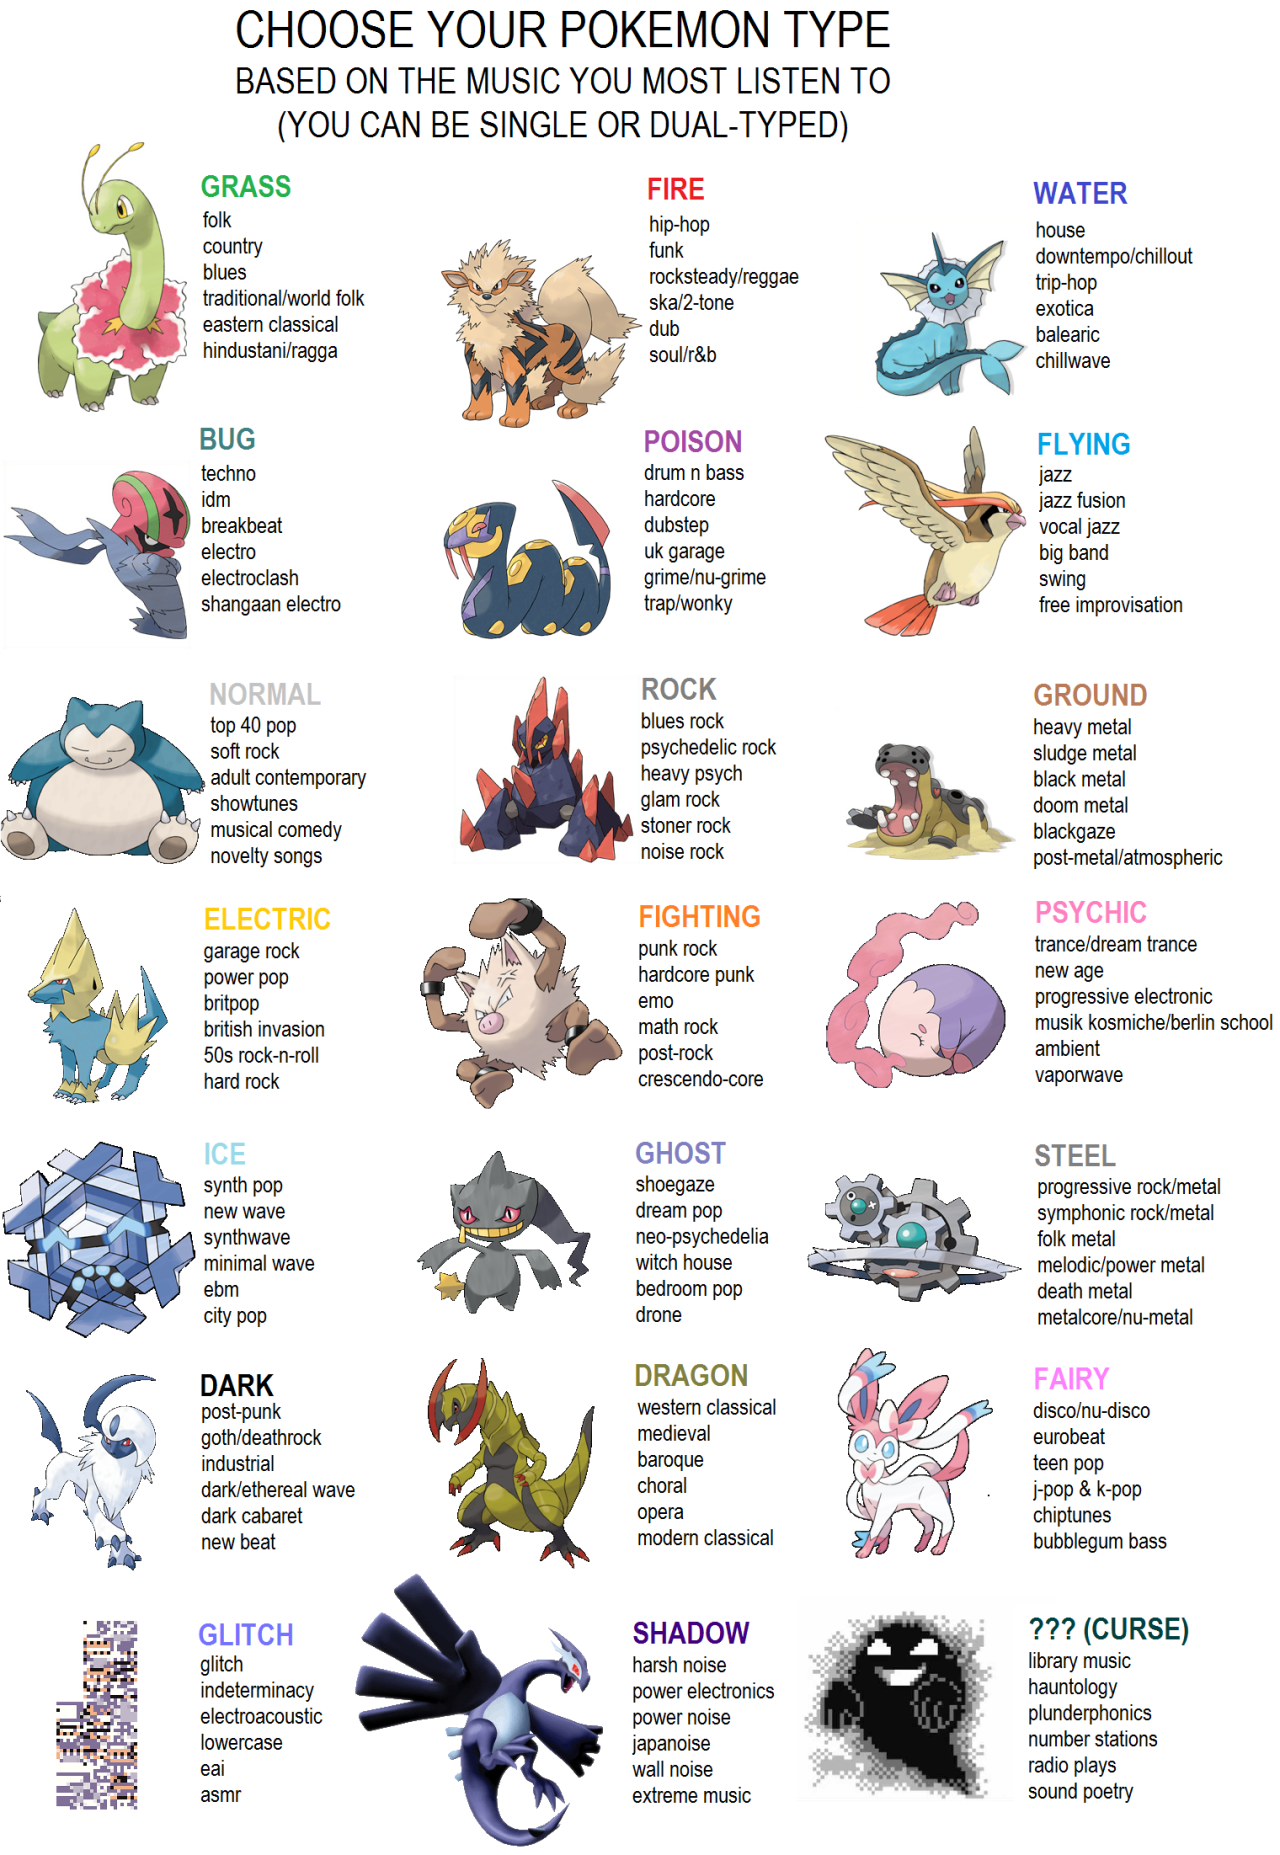 Mastering the pokemon type chart: Flying type #pokemon #fyp Ps theres